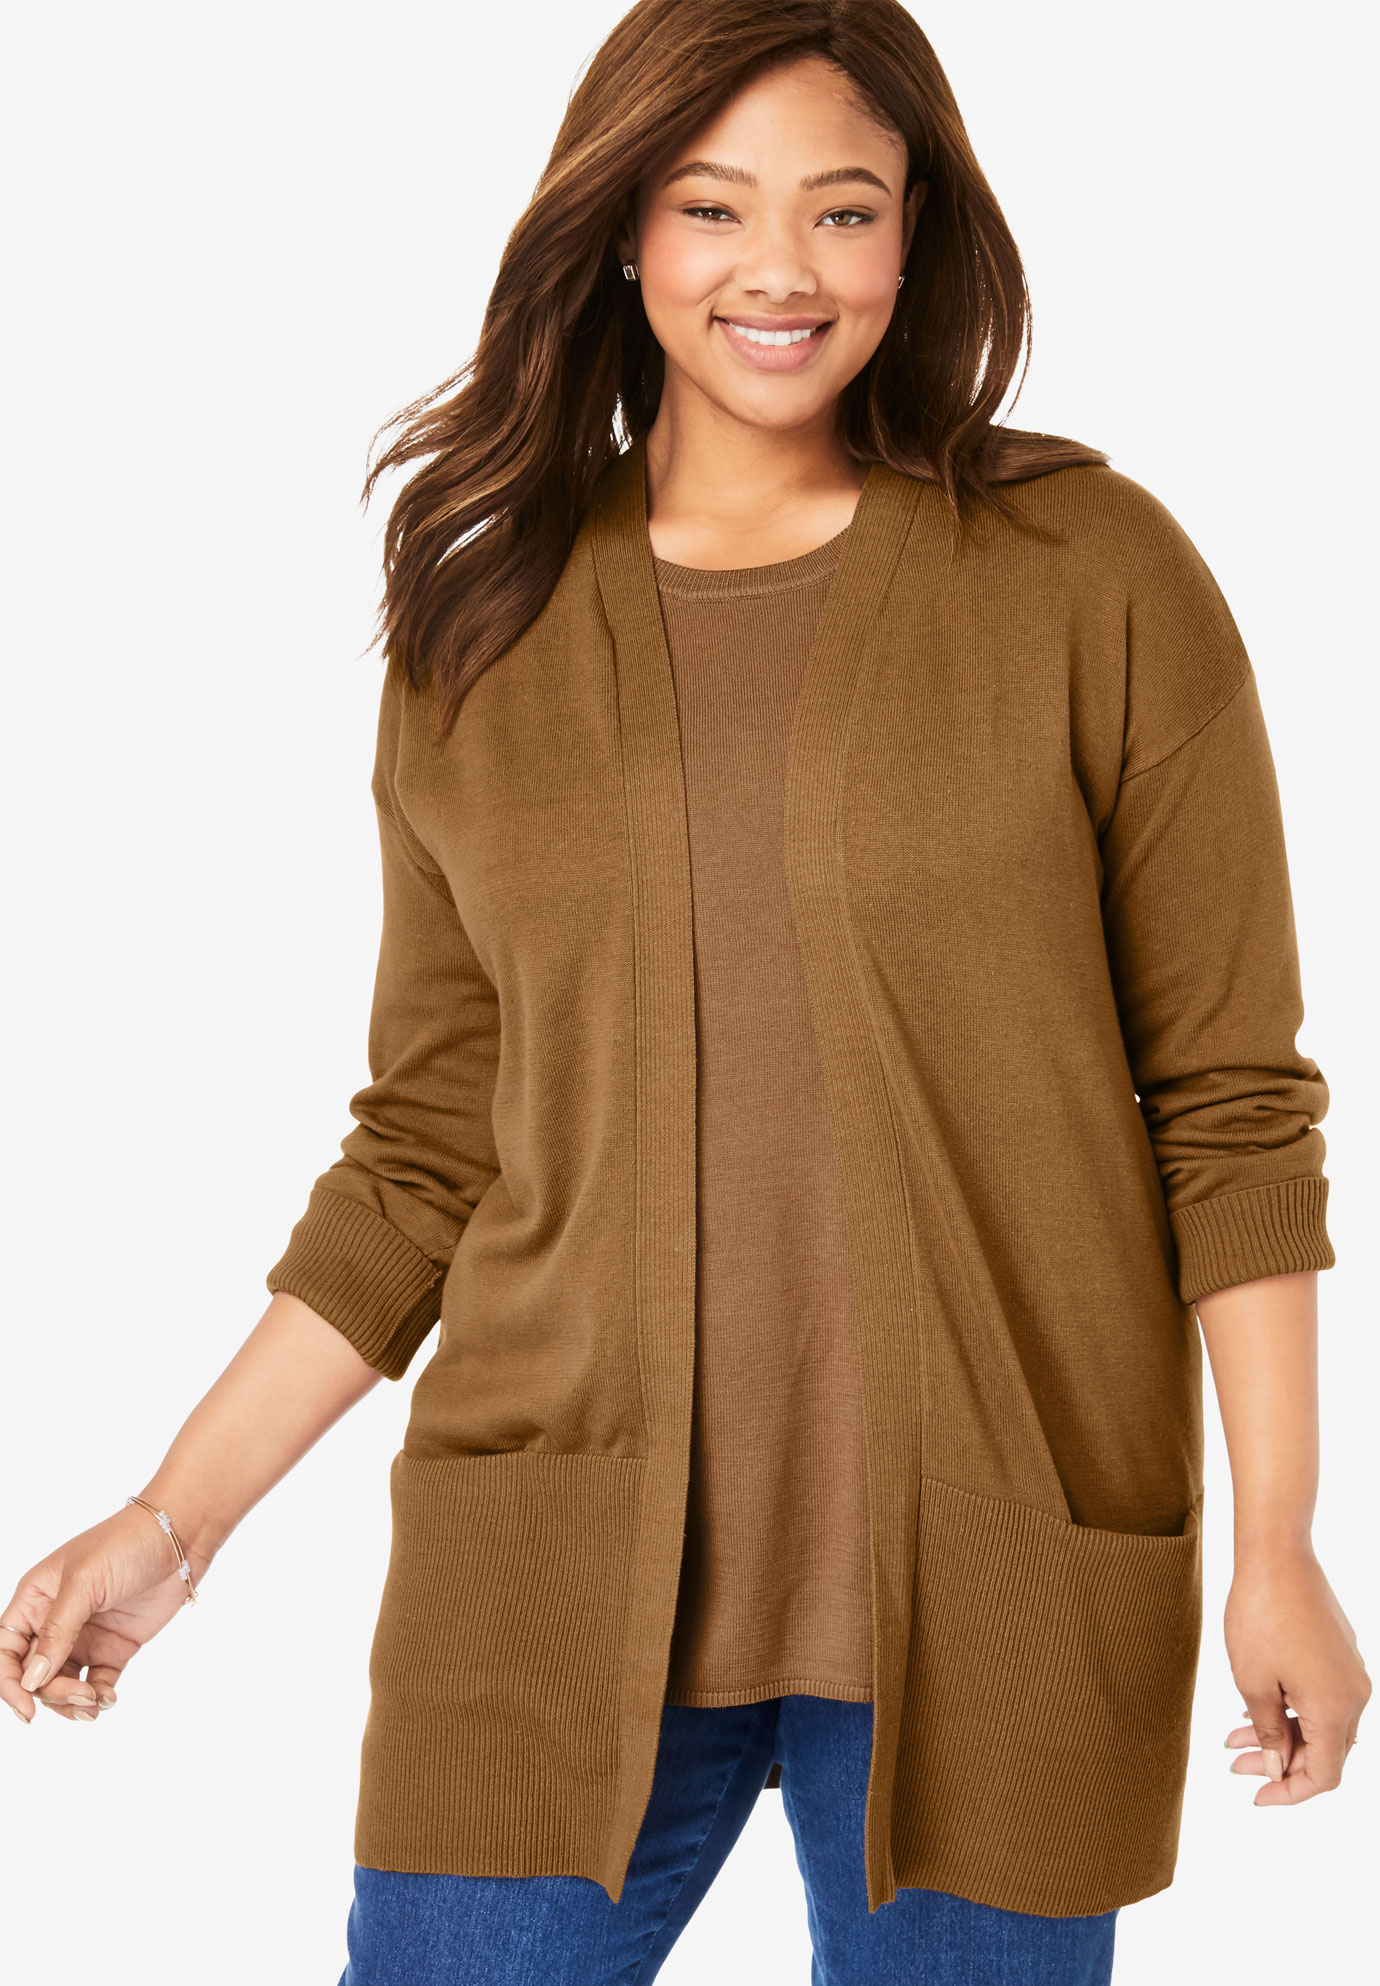 Fine Gauge Open Front Cardigan| Plus Size Tops | Woman Within